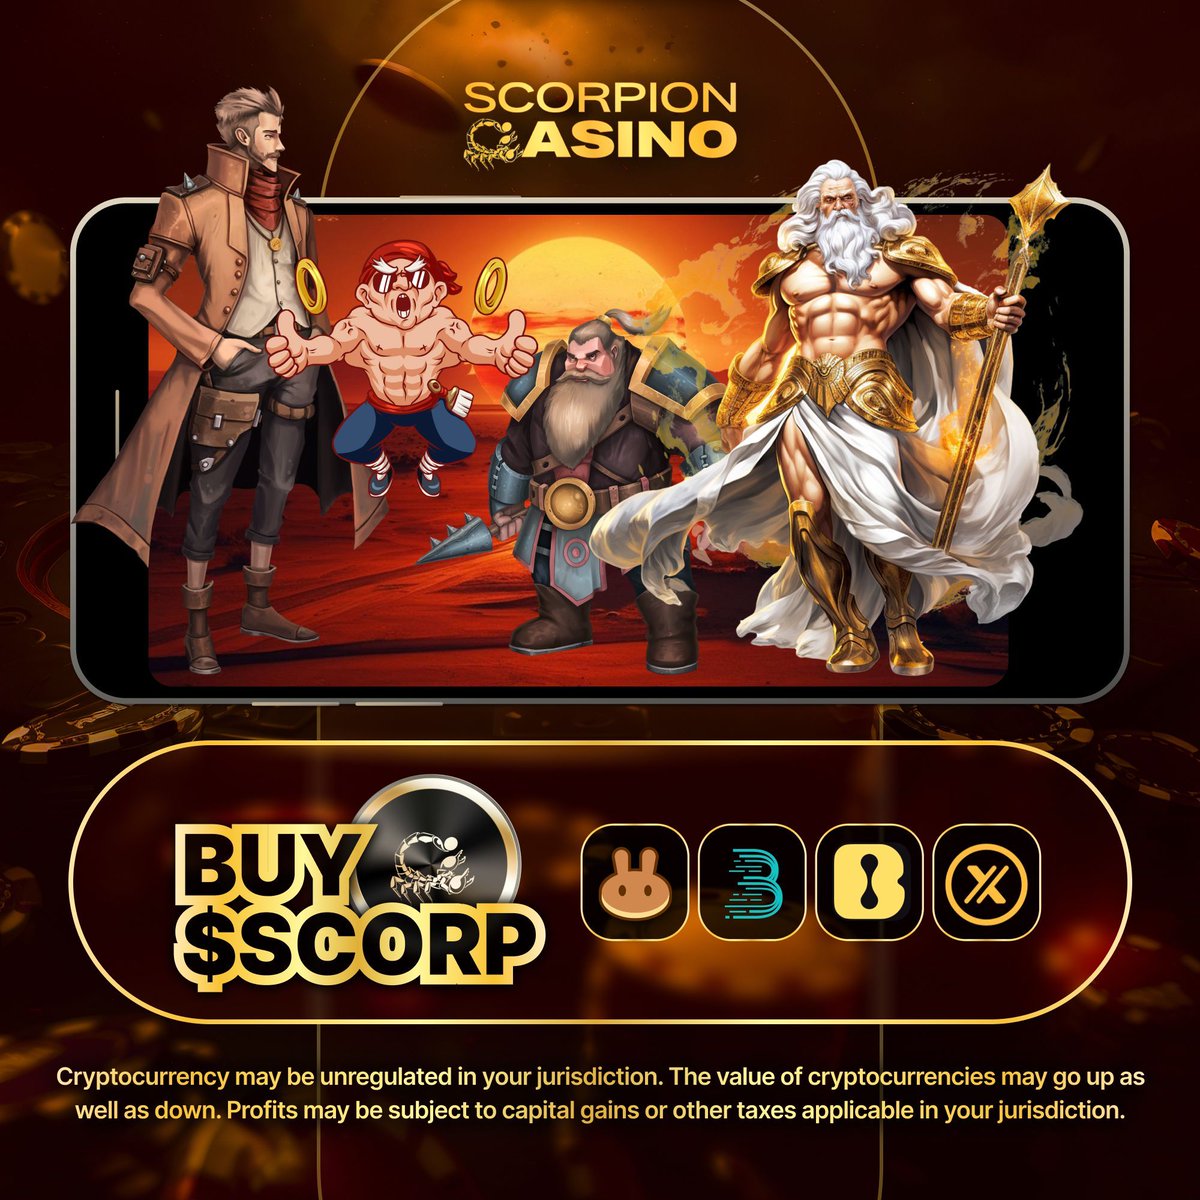 Play big, and embrace the lifestyle you've always dreamed of. ⭐️ 

🔥 Buy now on Pancakeswap here: 
buff.ly/3UlwSpf

🔥 Trade $SCORP with Lbank now: buff.ly/3WmfuCv

#ScorpionCasino #FinancialFreedom #GoAllIn #CryptoGambling